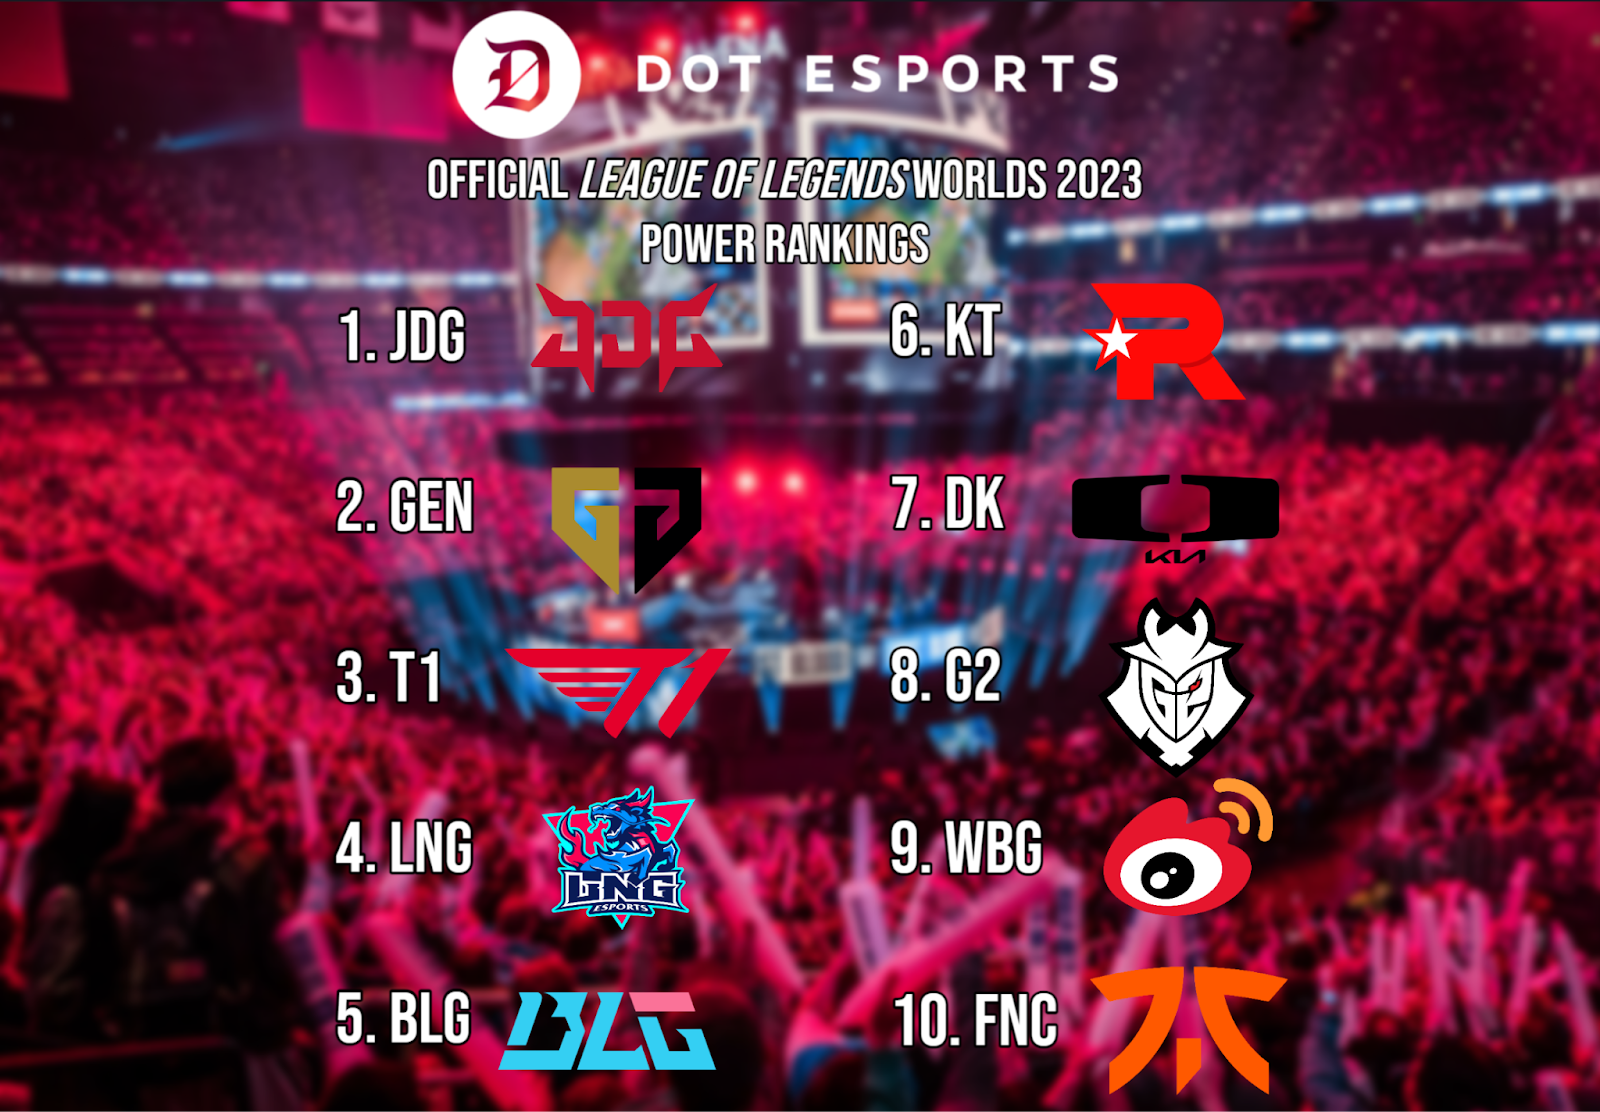 10 best ADCs in League of Legends Worlds 2023, ranked